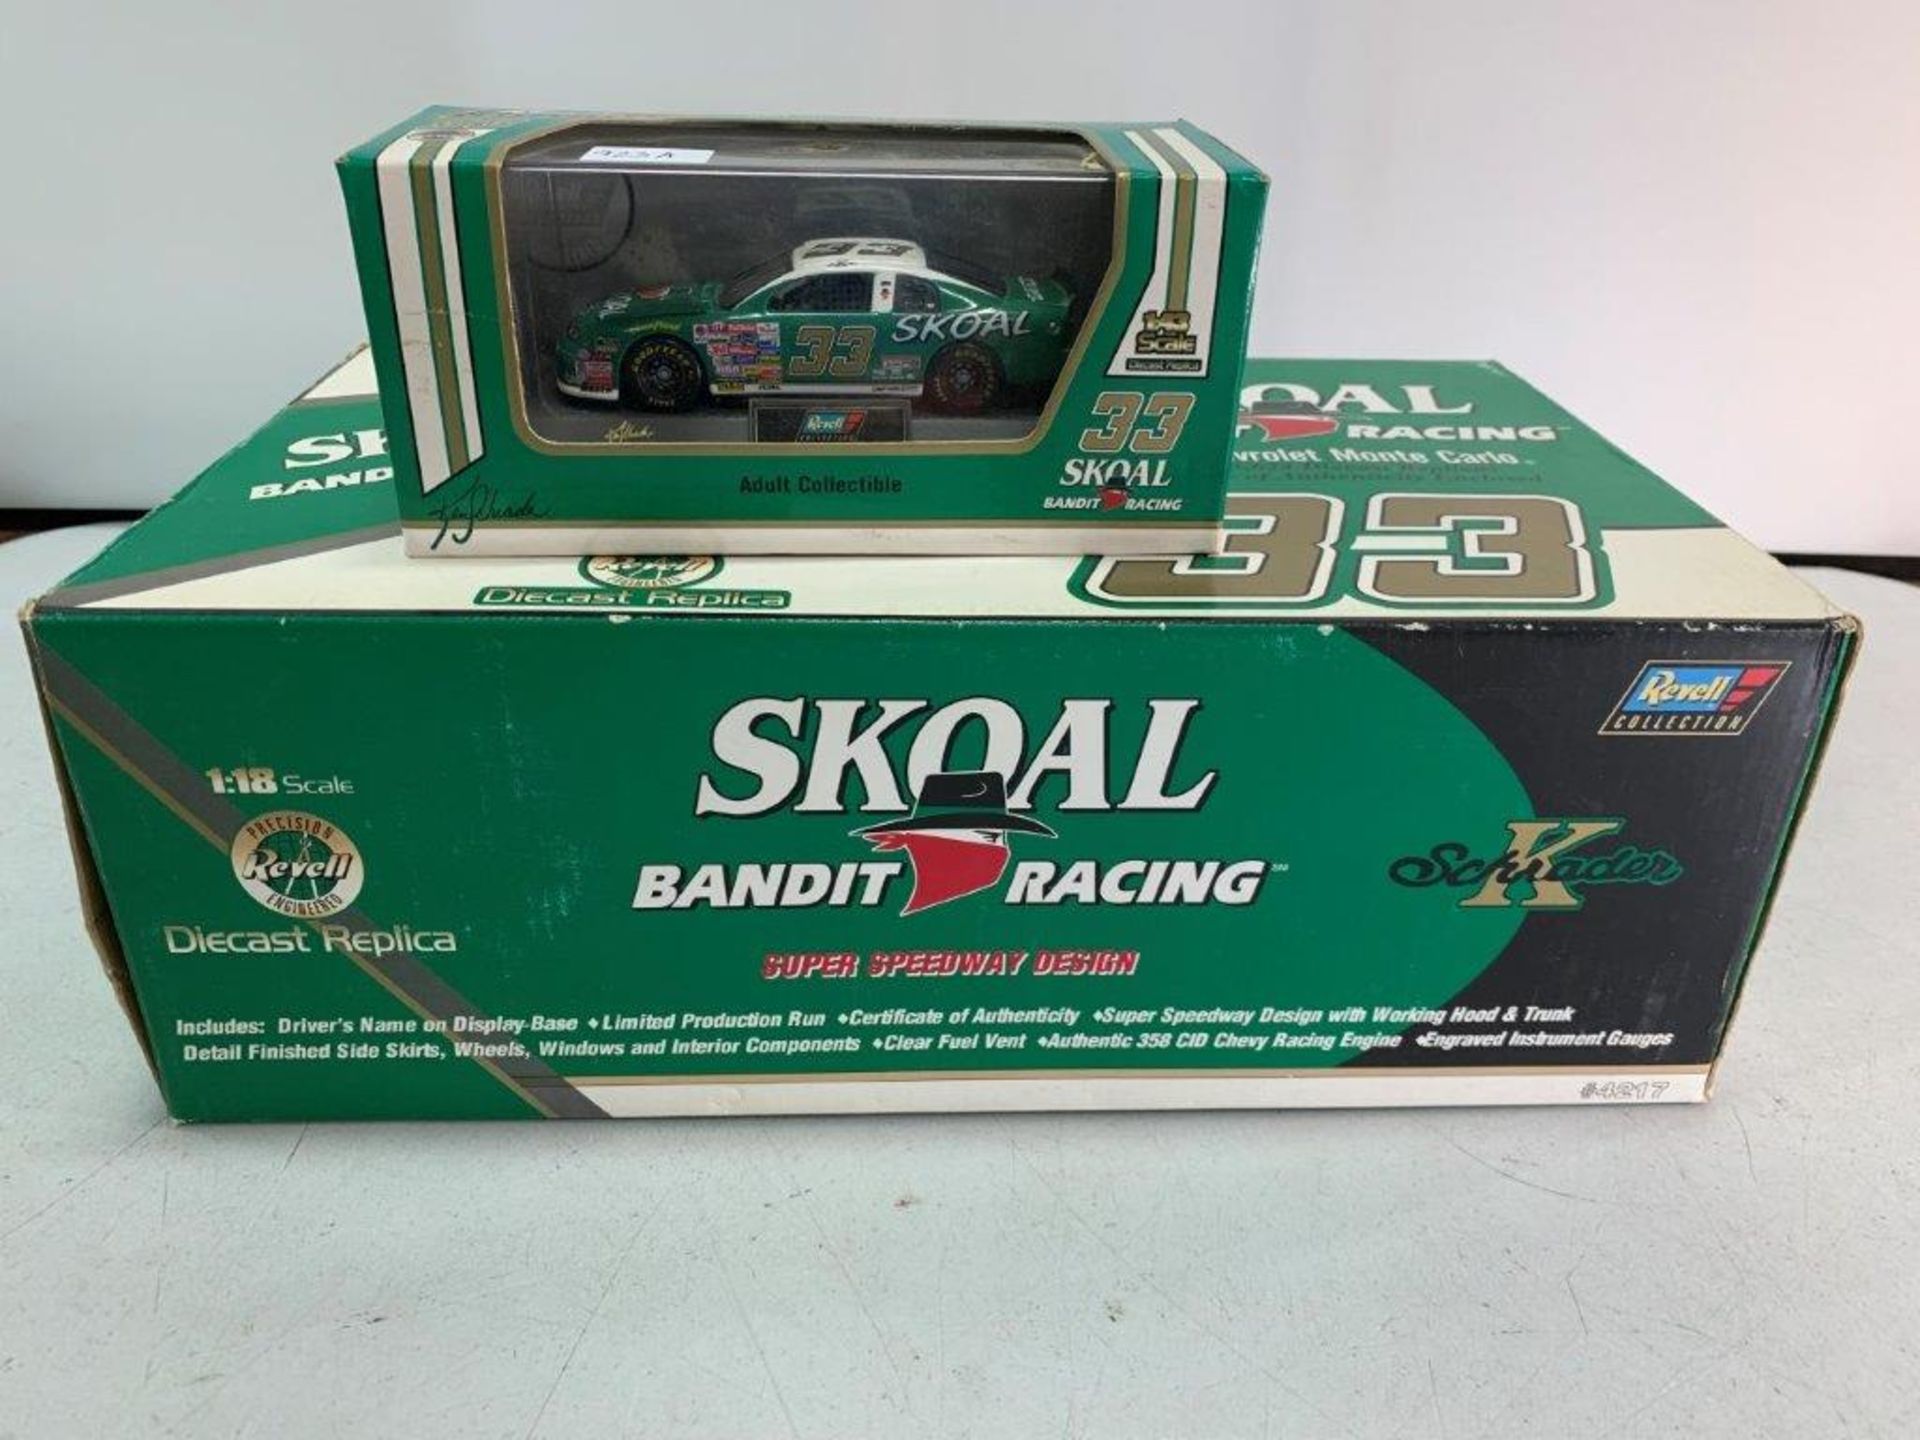 REVELL COLLECTION SKOAL BANDIT RACING DIE CAST REPLICA CARS